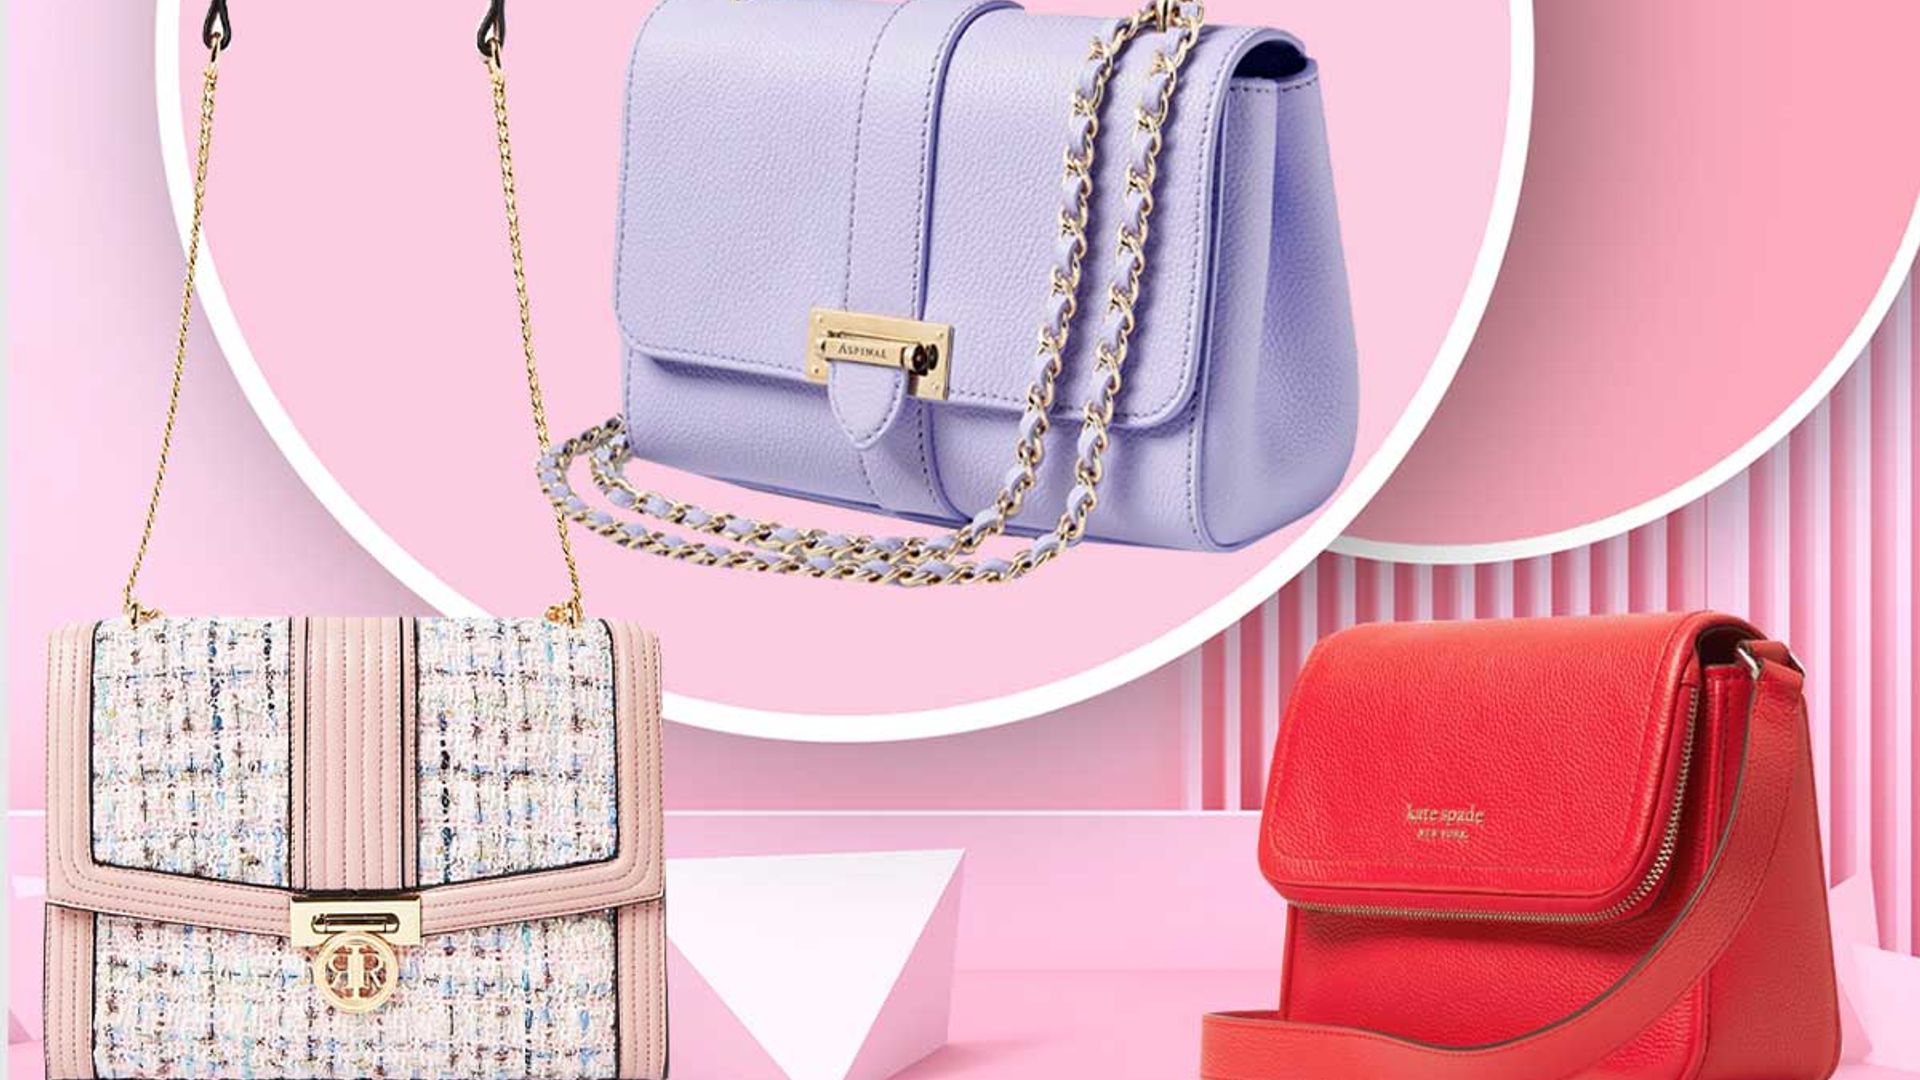 The crossbody bags we're loving right now - from £25 to luxury designer styles